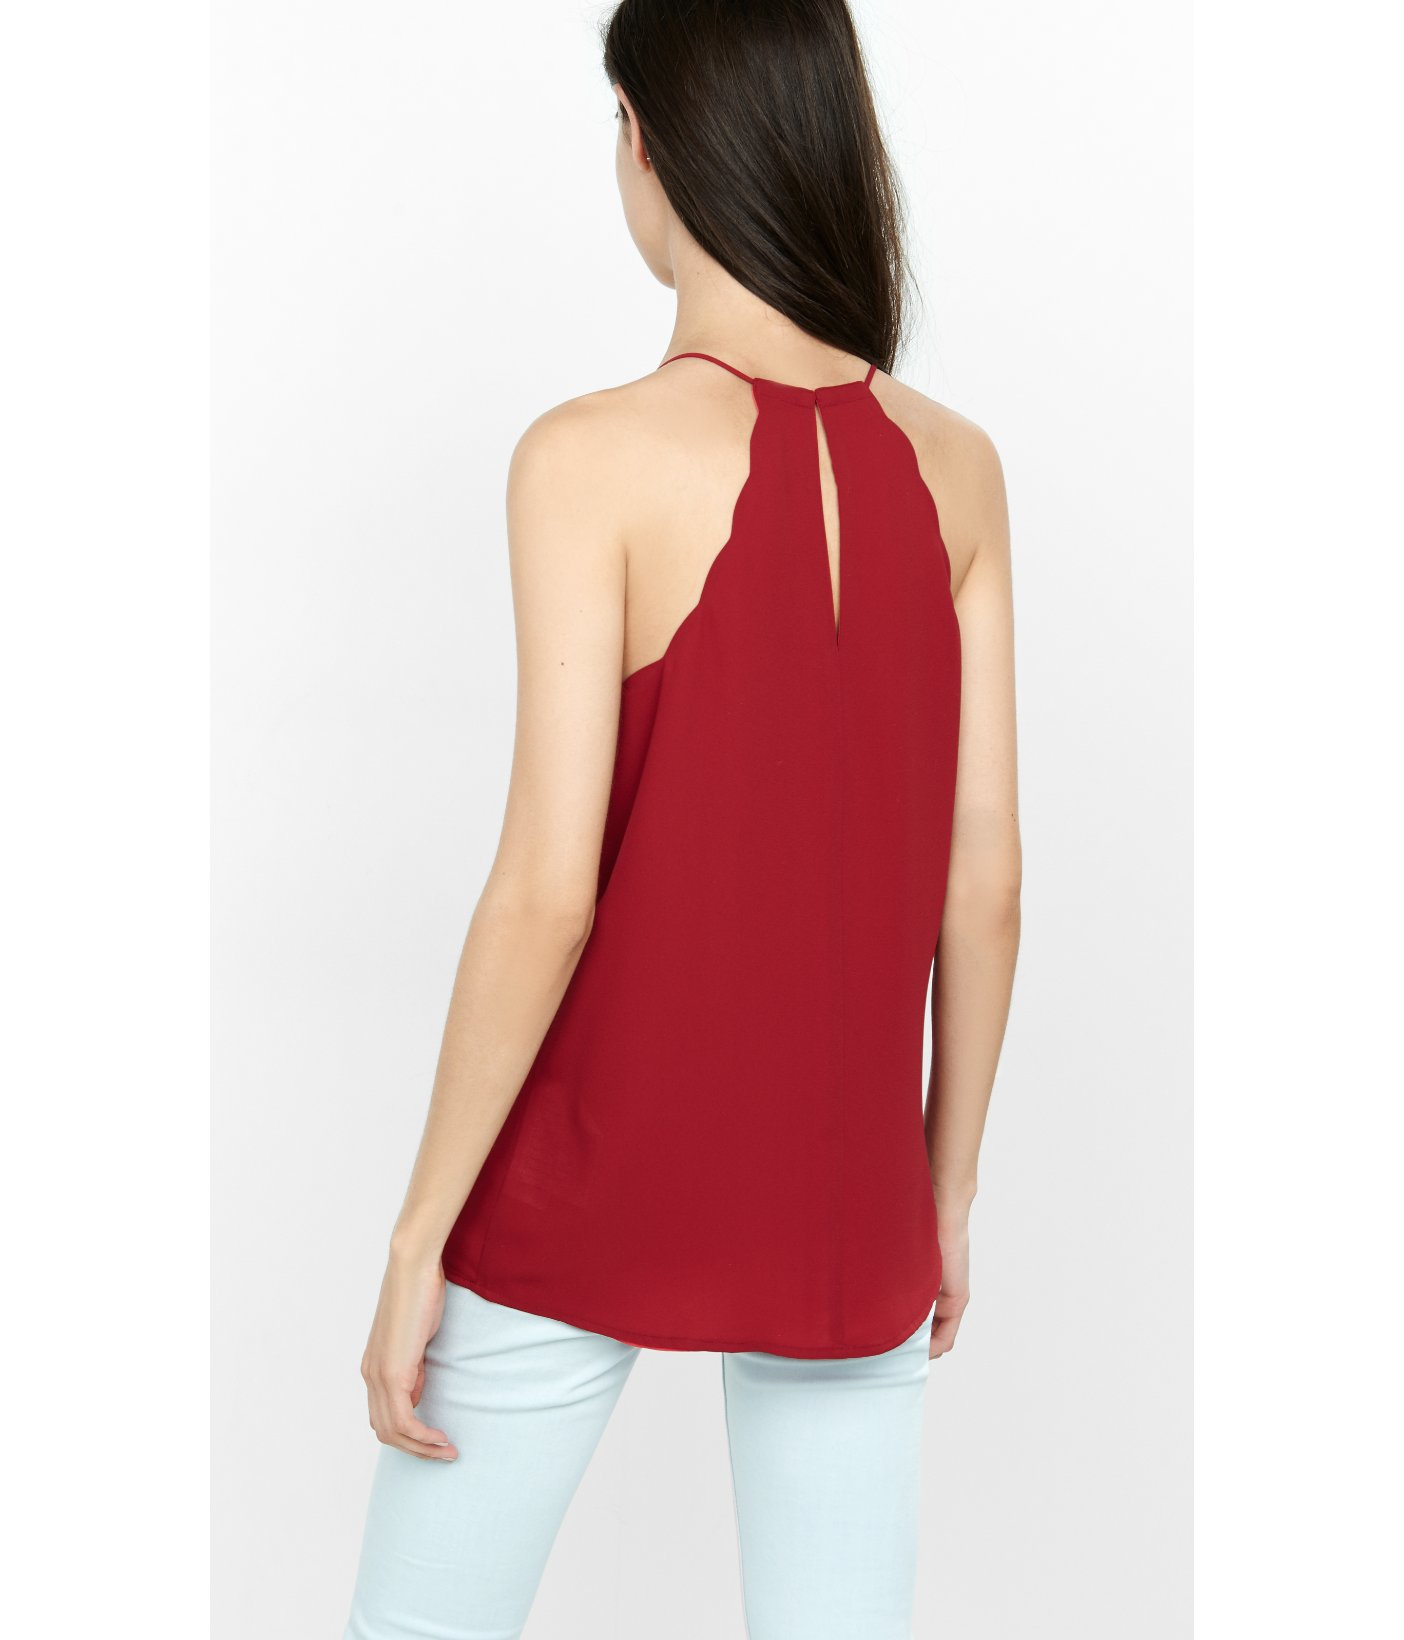 Lyst - Express Scallop Trim Reversible Barcelona Cami in Red